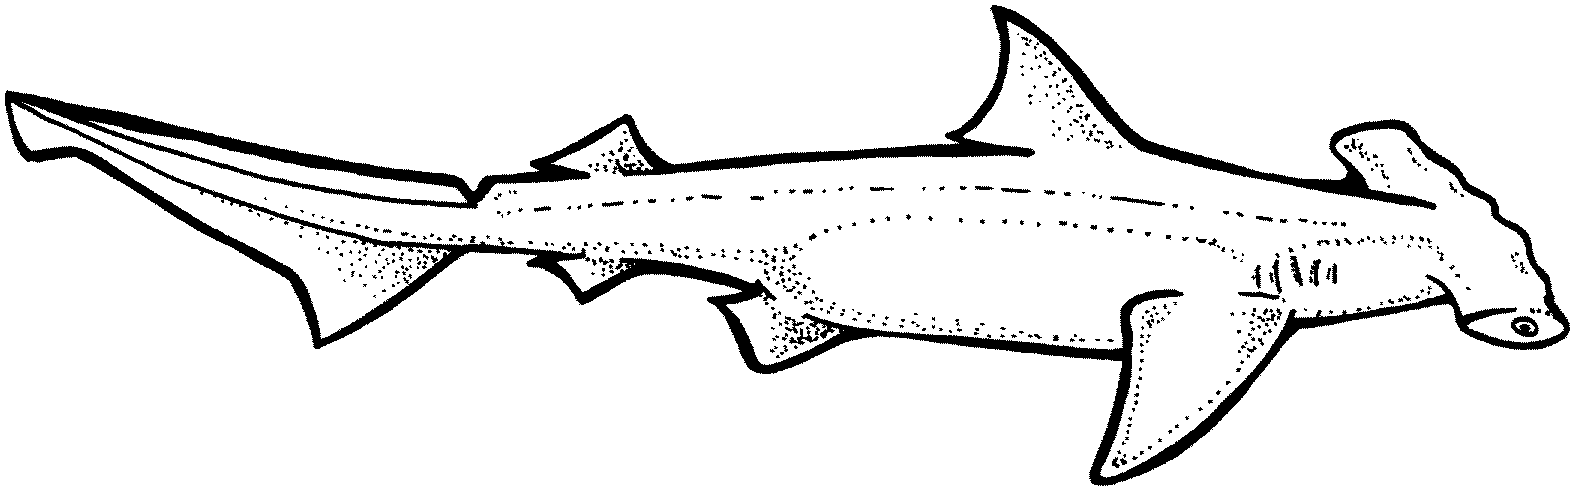 hammerhead shark coloring pages free shark coloring pages pages hammerhead coloring shark 